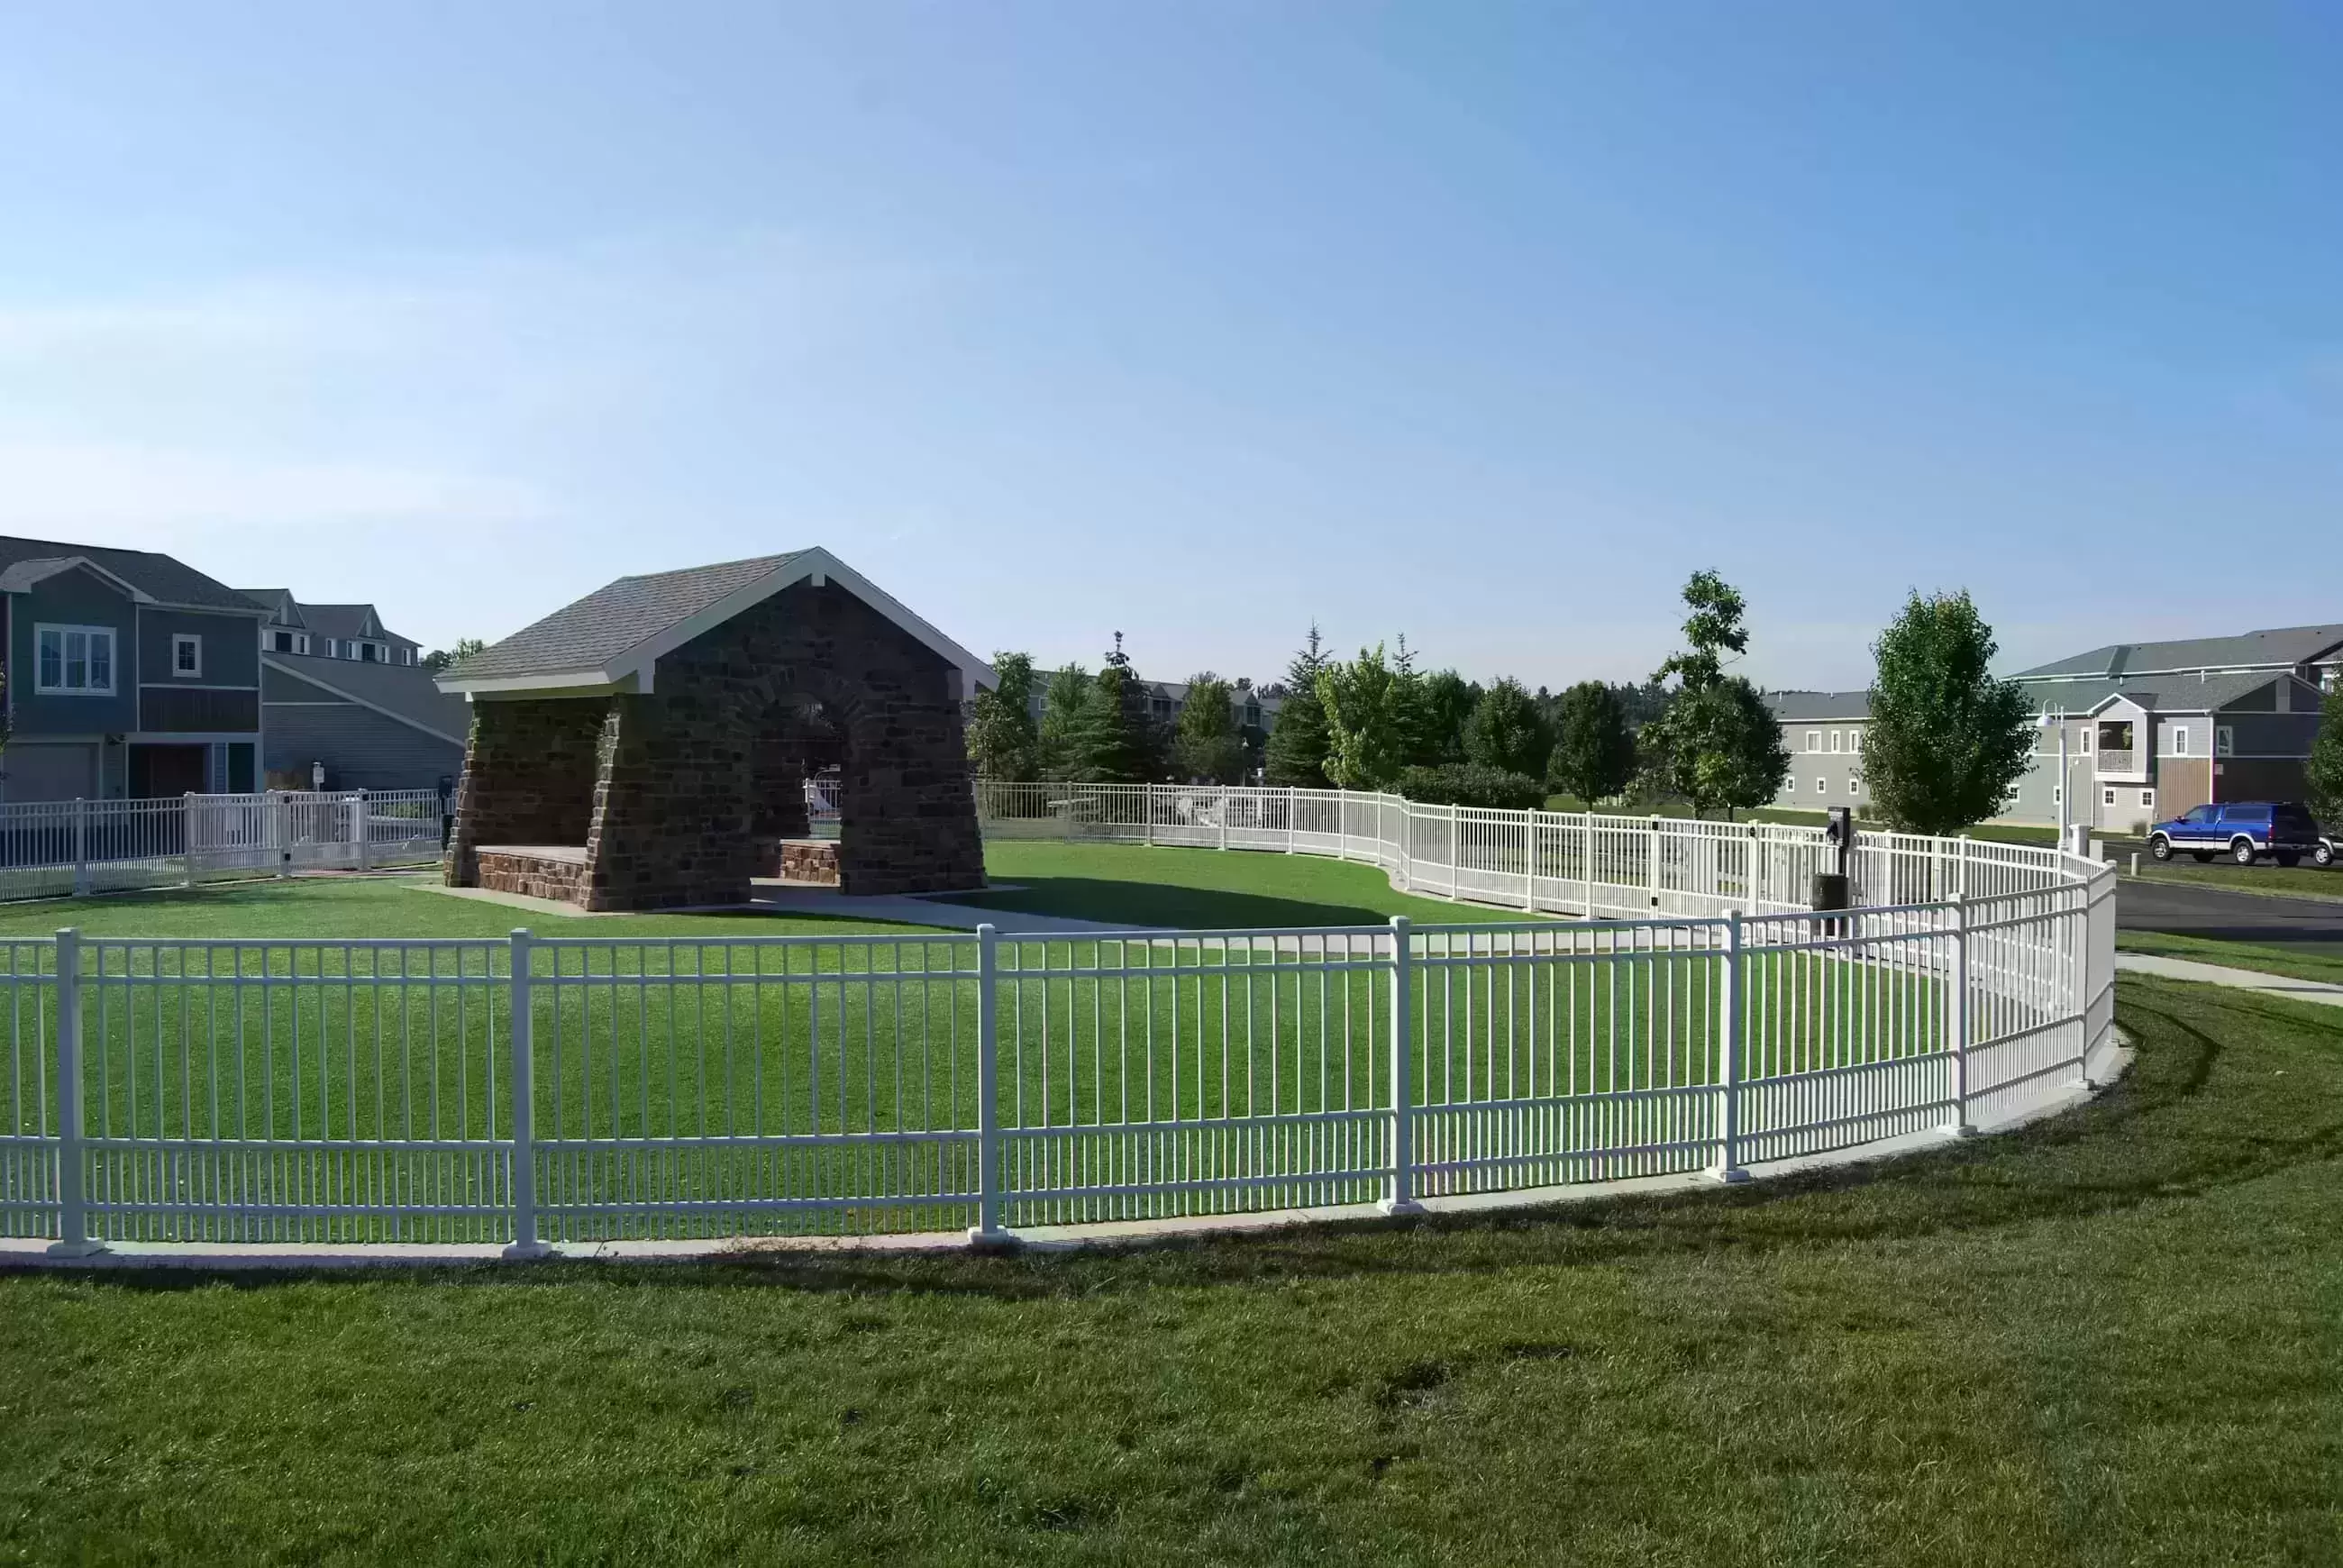 The Bark Park, a fenced grassy area with a covered patio.